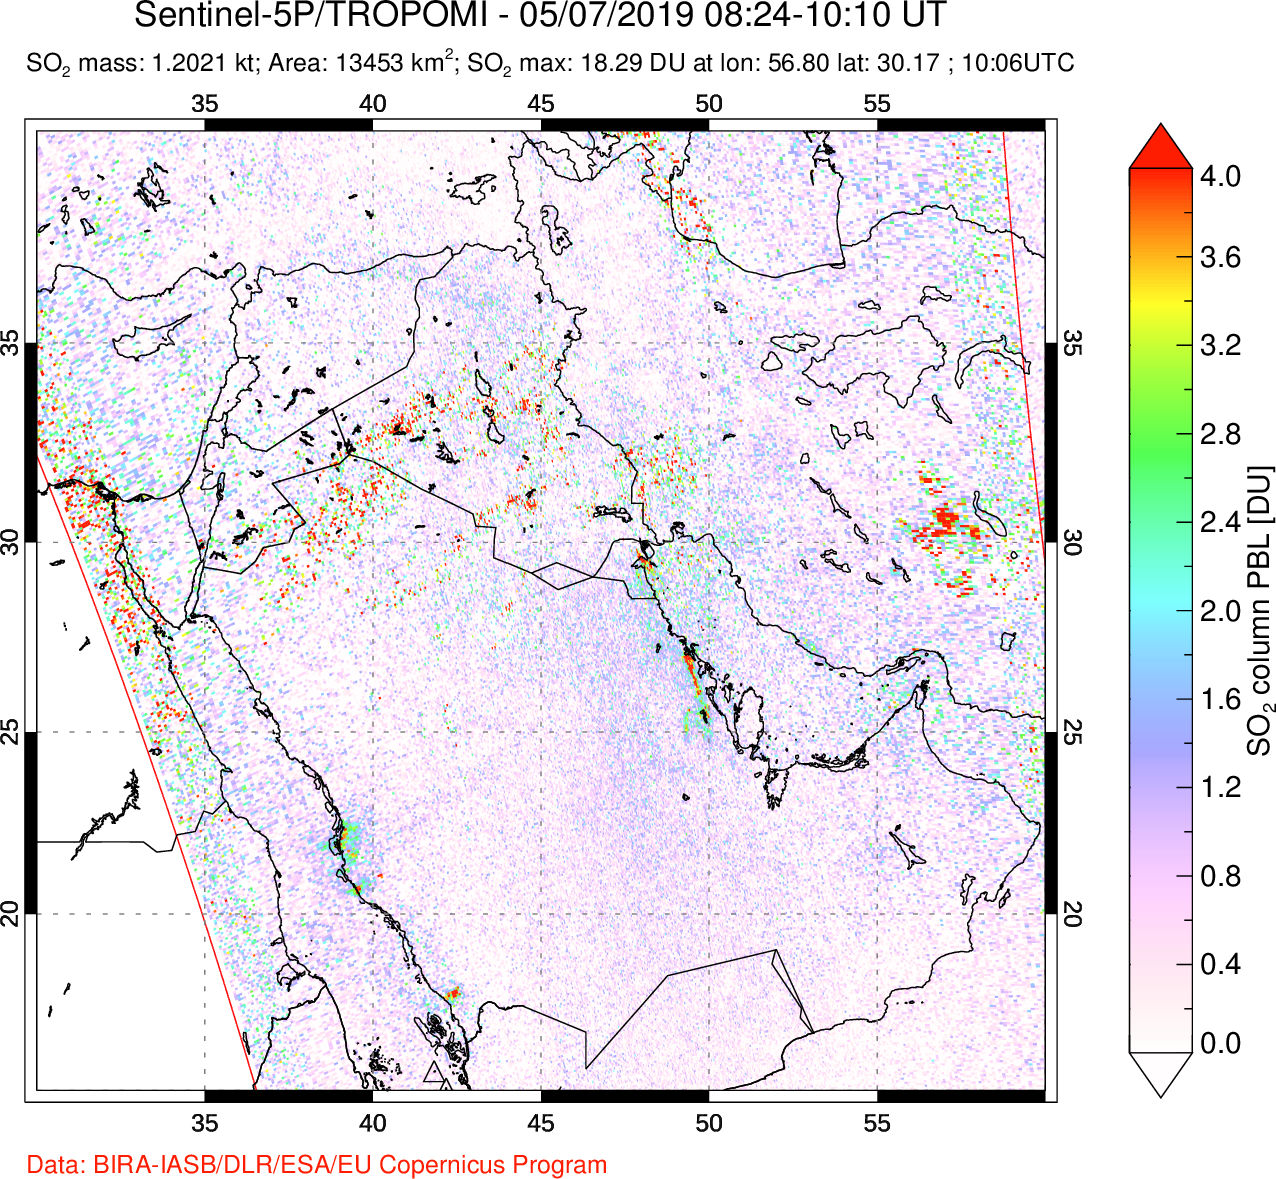 A sulfur dioxide image over Middle East on May 07, 2019.